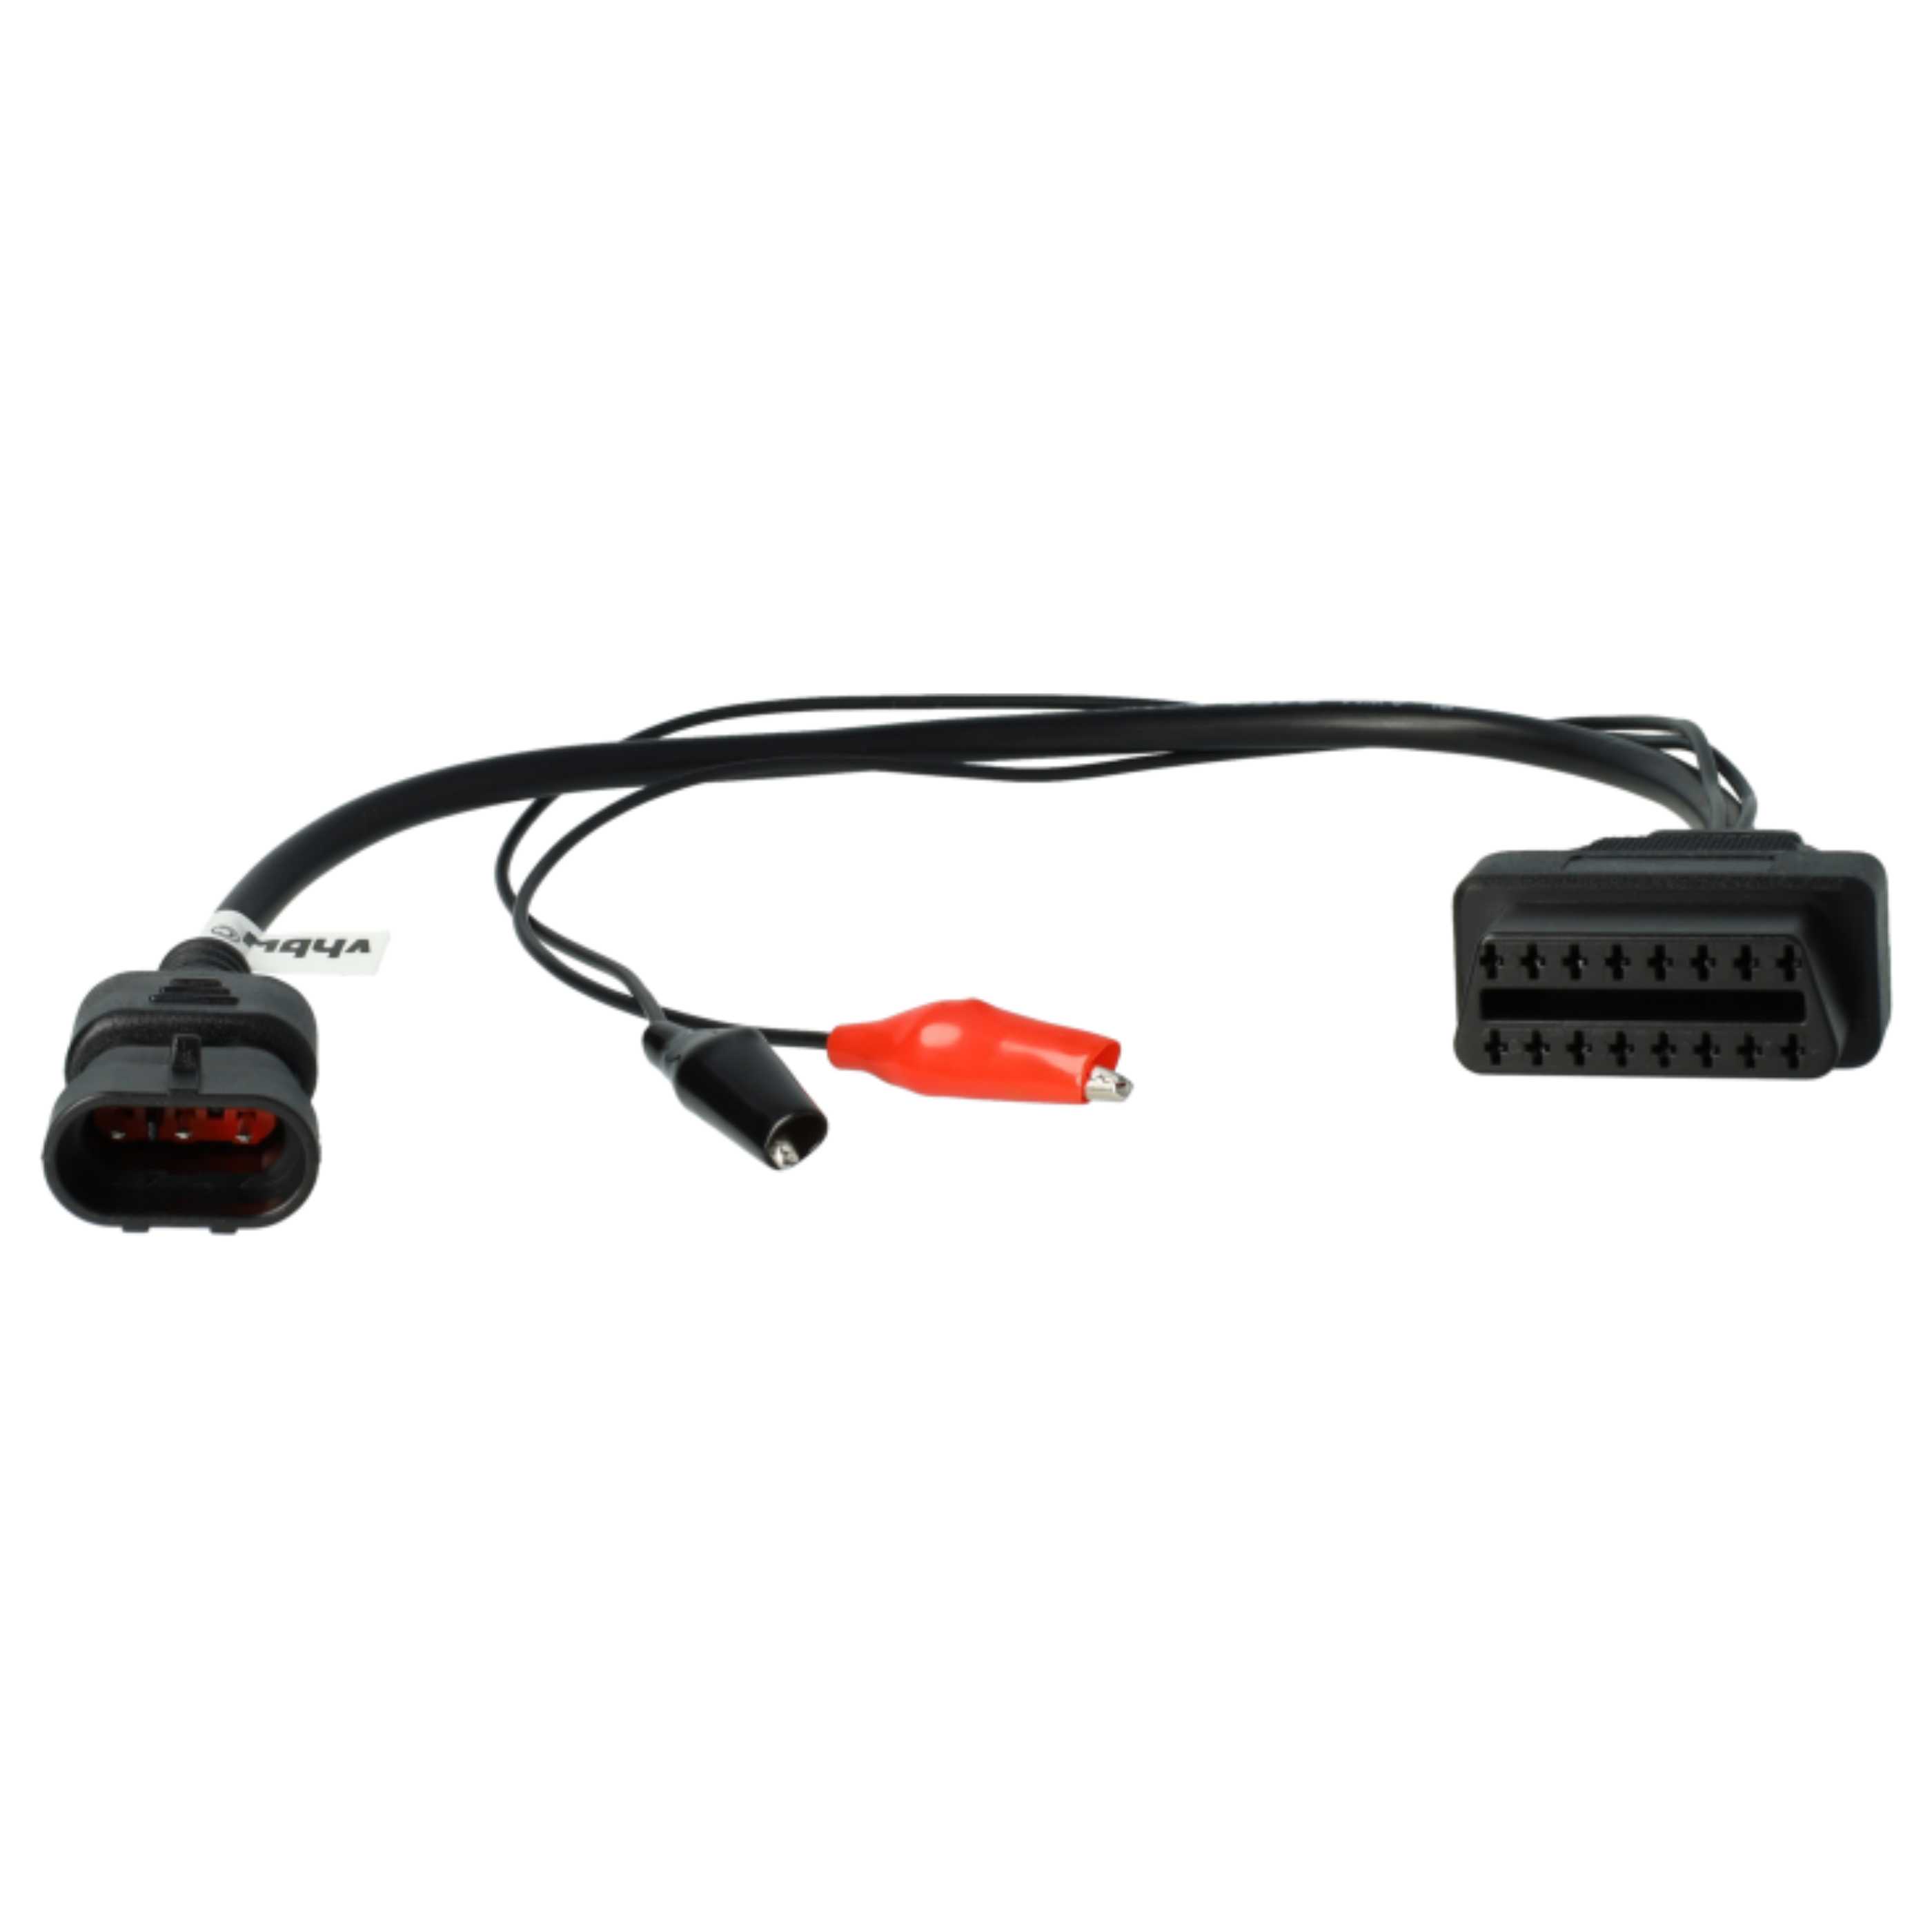 vhbw OBD2 Adapter 3Pin OBD1 to OBD2 suitable for with 2 Pin Plug, with 2 Pin Plug, with 2 Pin Plug Citroen, Pe